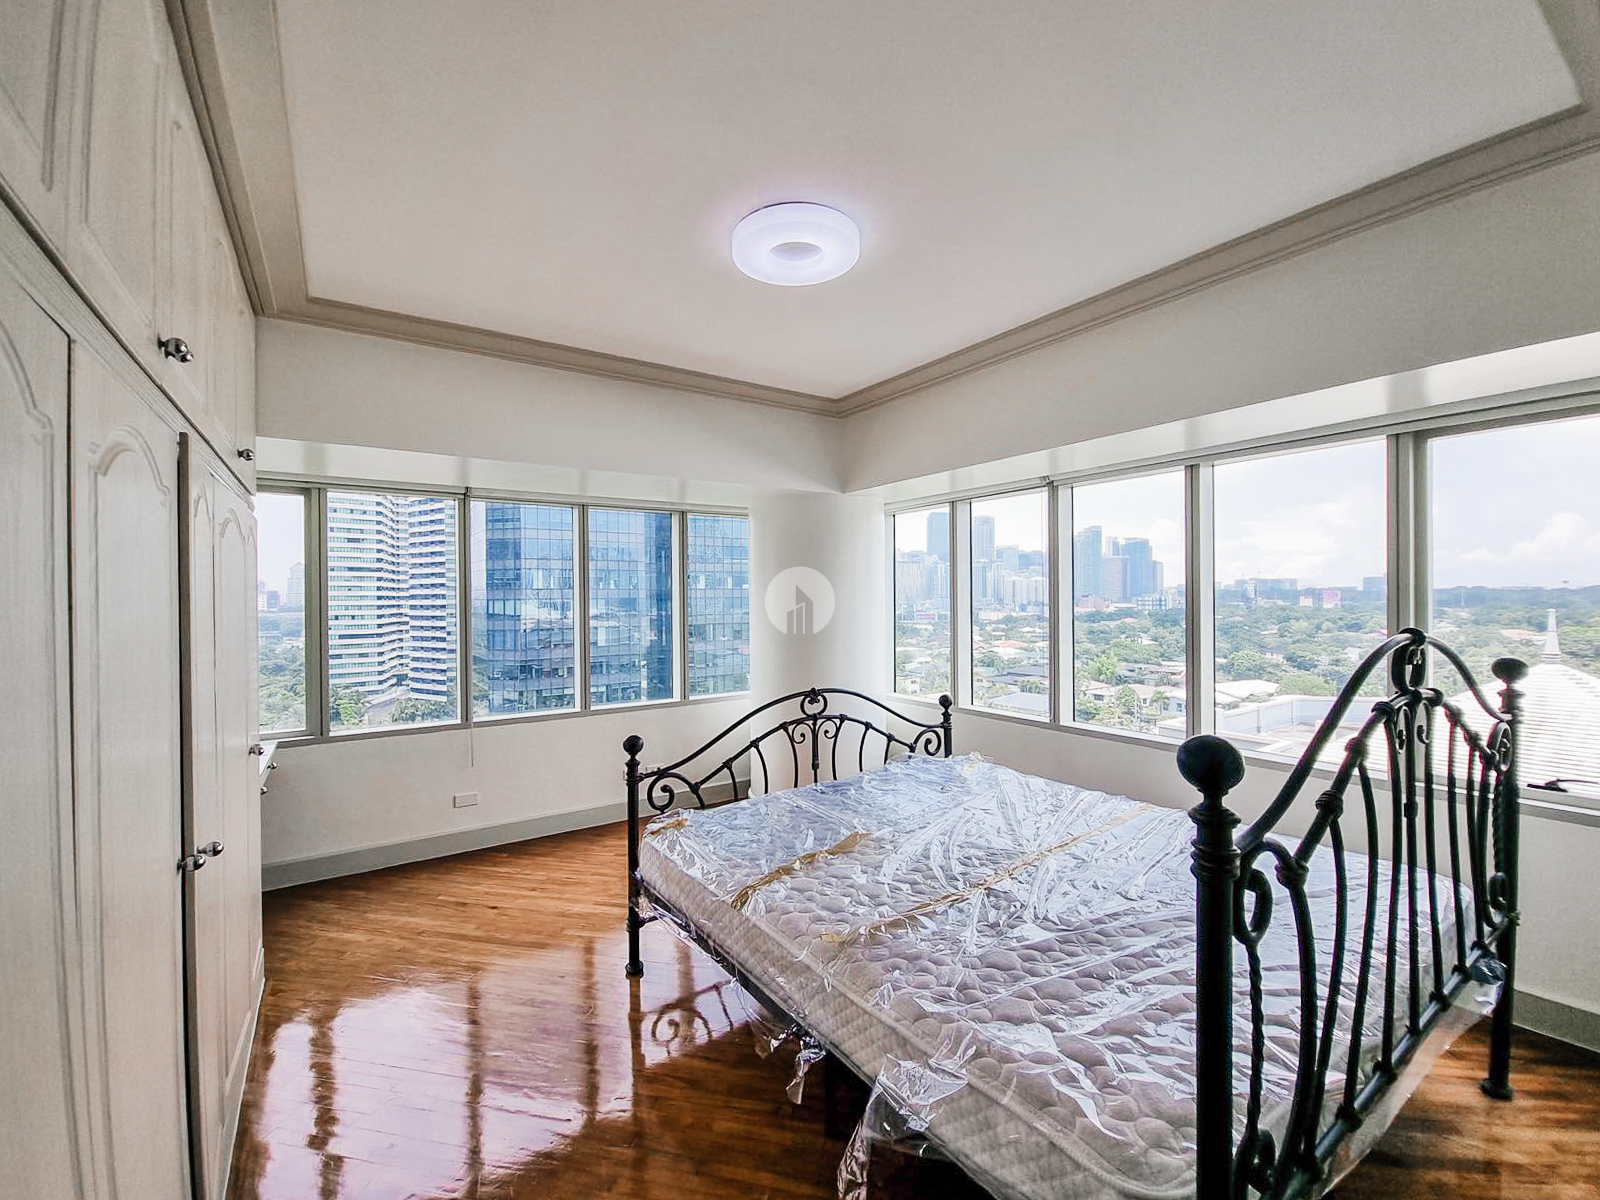 197sqm Condo Unit in Hidalgo Place Rockwell Makati for Lease - Golden Sphere Realty